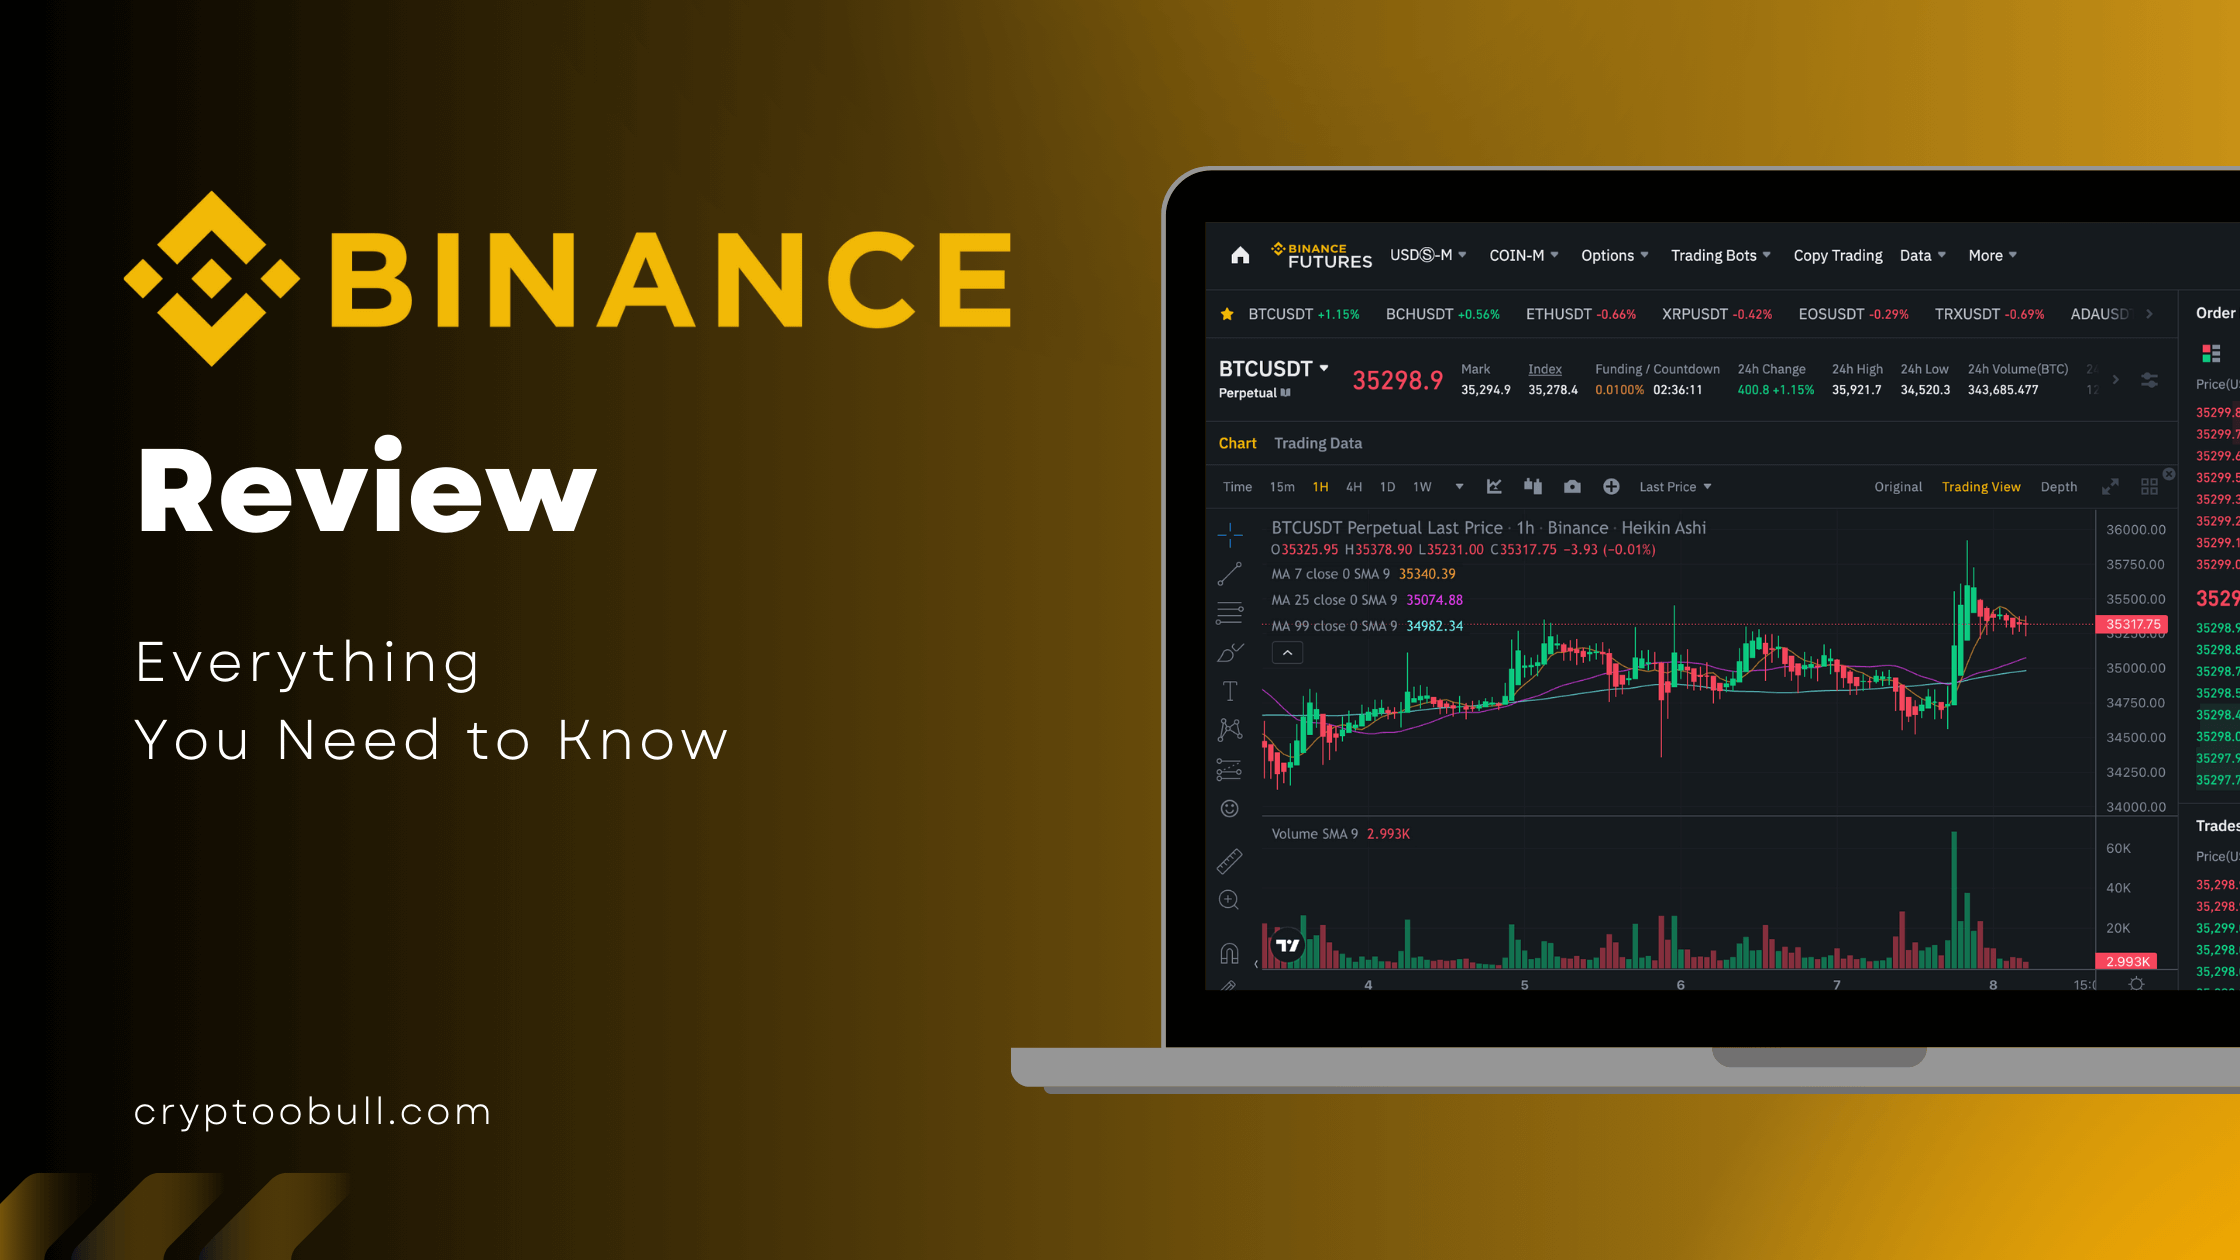 The Complete Binance Review: Everything You Need to Know